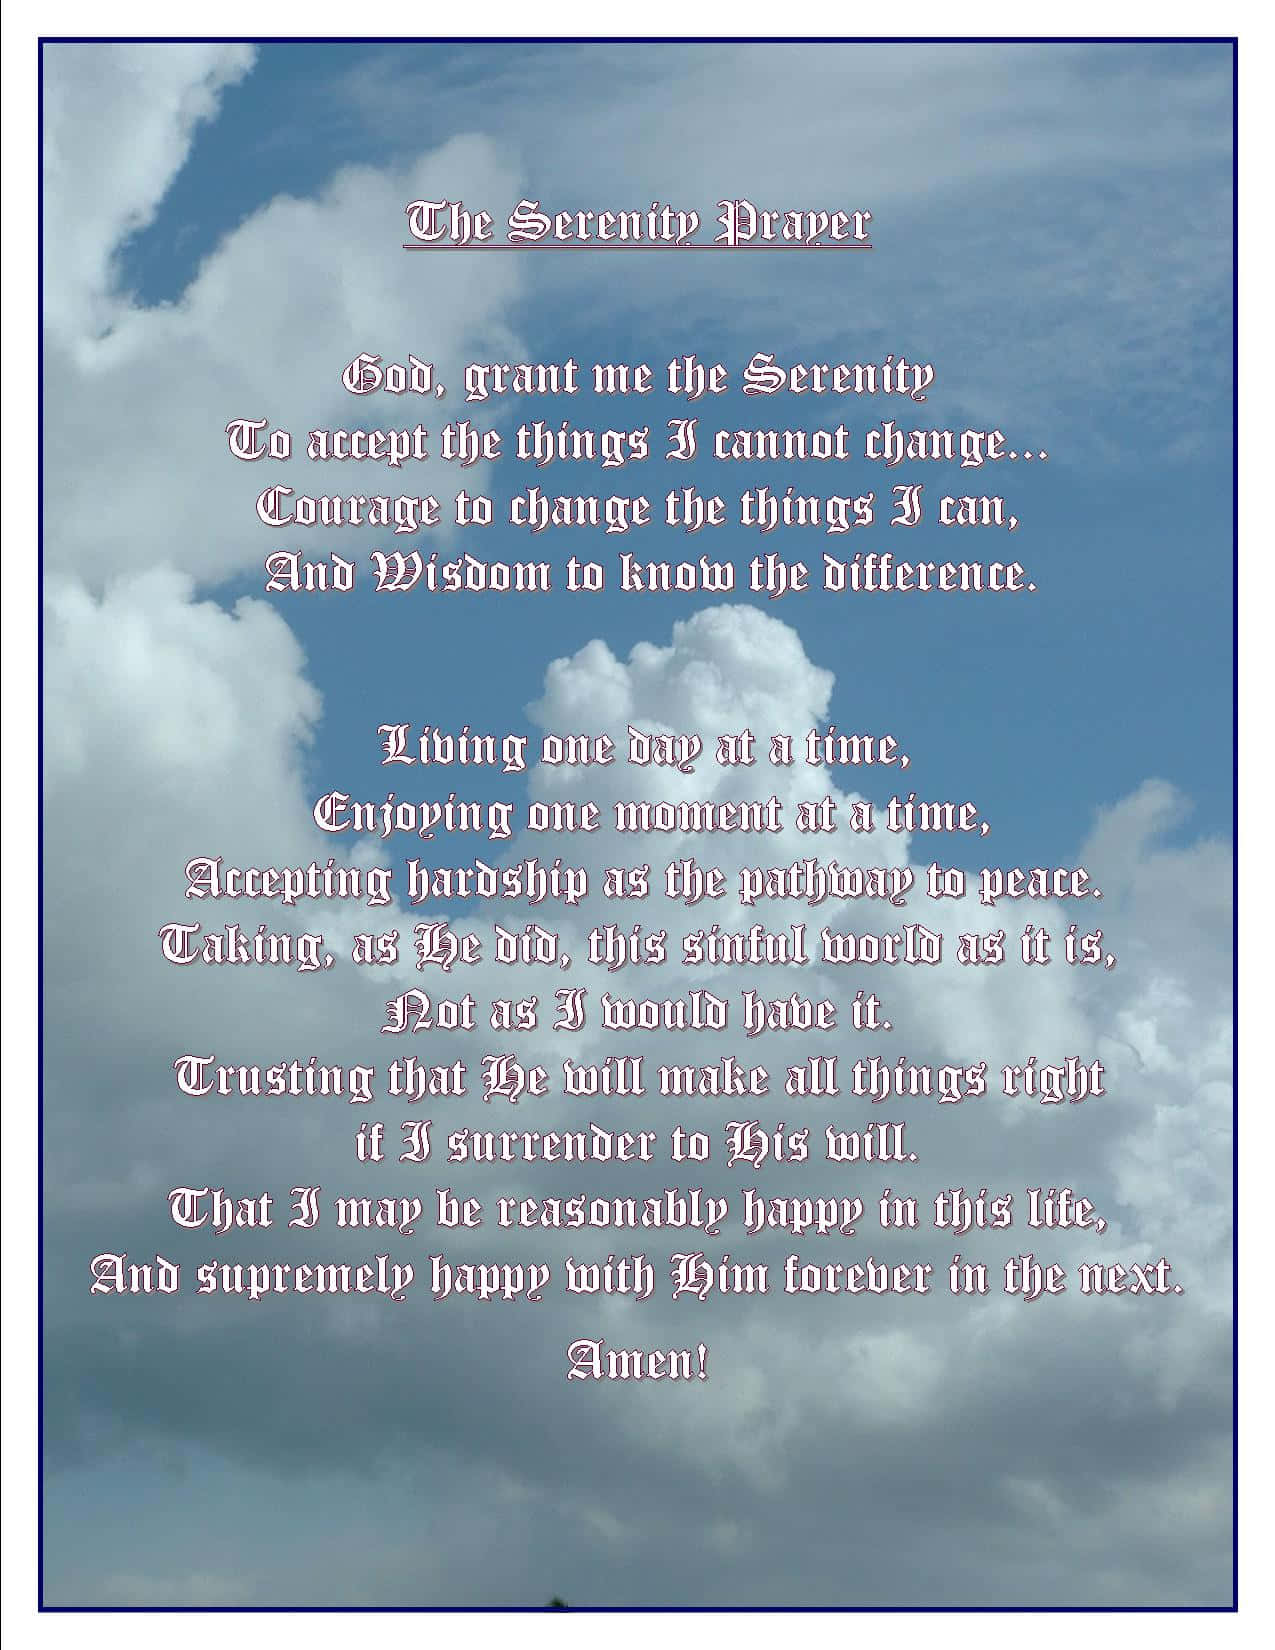 Clouds With The Blue Skies Serenity Prayer